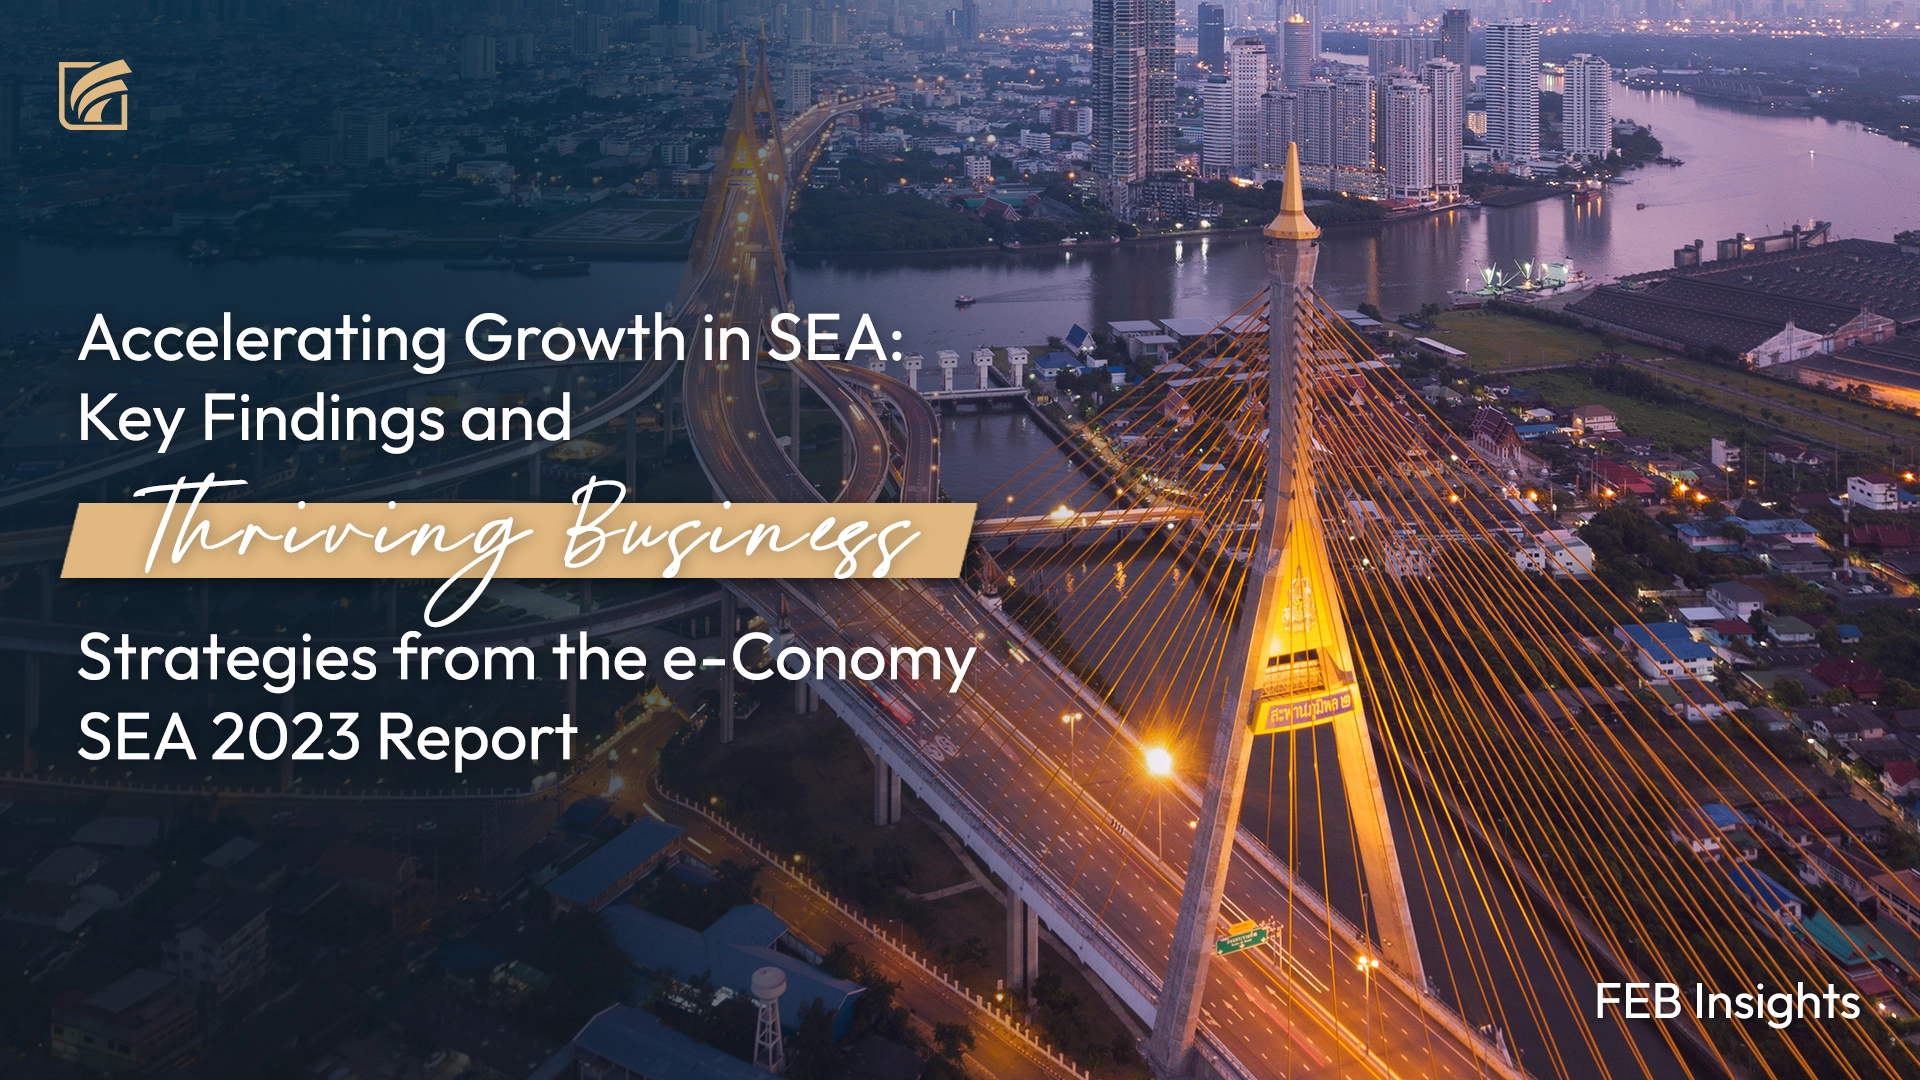 Accelerating Growth in SEA: Key Findings and Thriving Business Strategies from the e-Conomy SEA 2023 Report